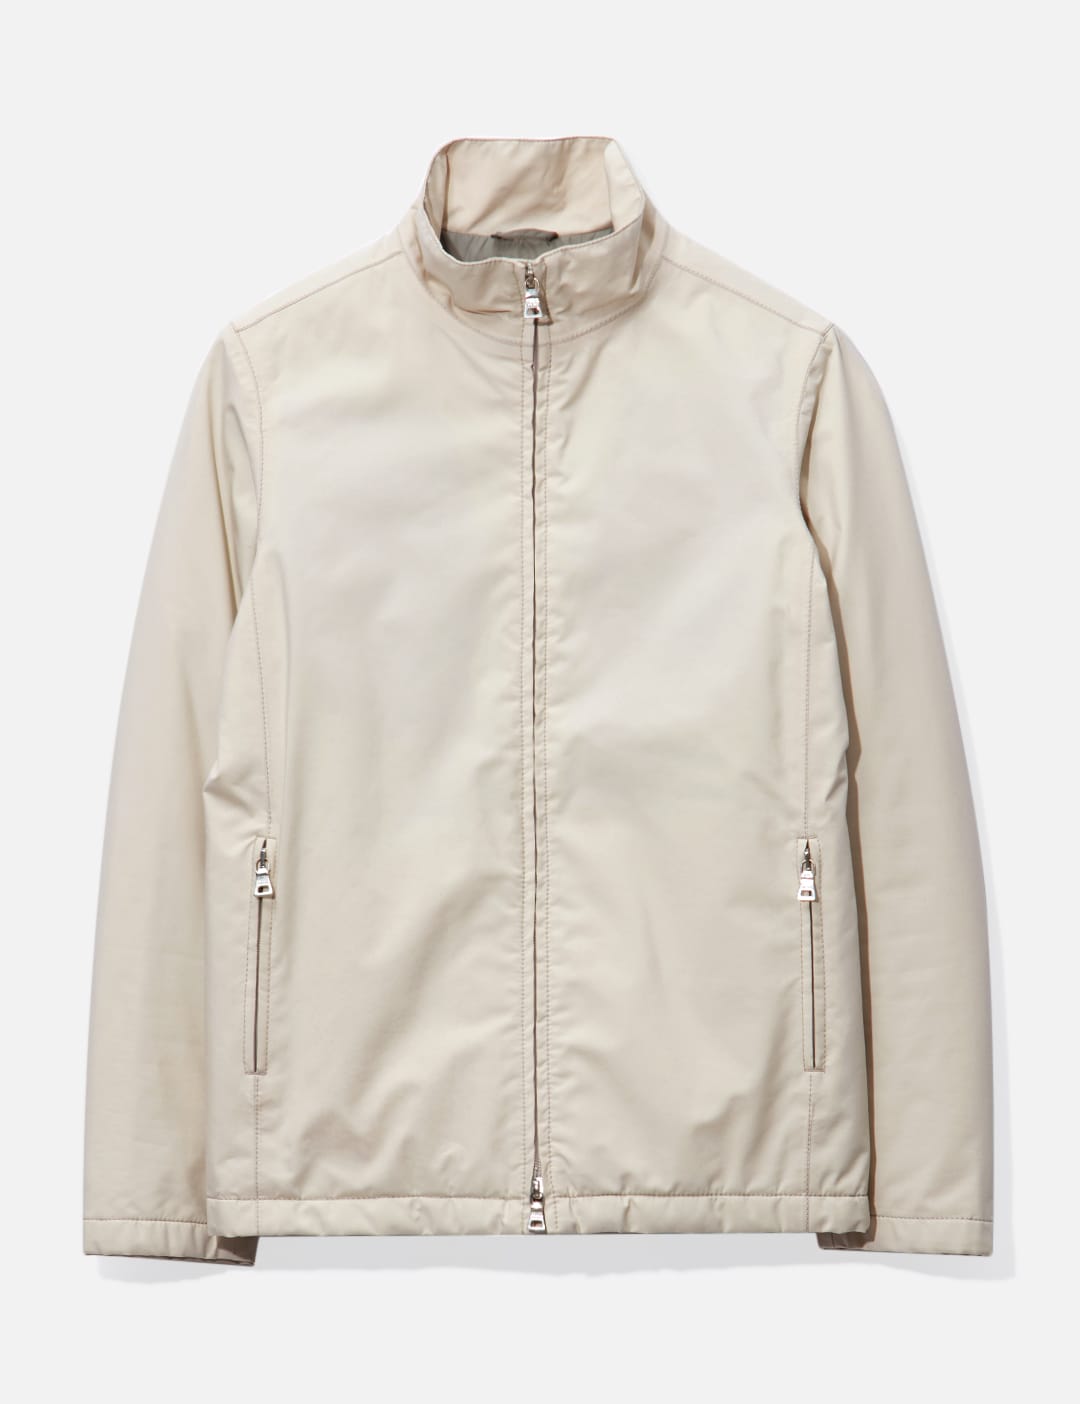 Prada - Prada Gore-Tex Zip-up Jacket | HBX - Globally Curated Fashion and  Lifestyle by Hypebeast